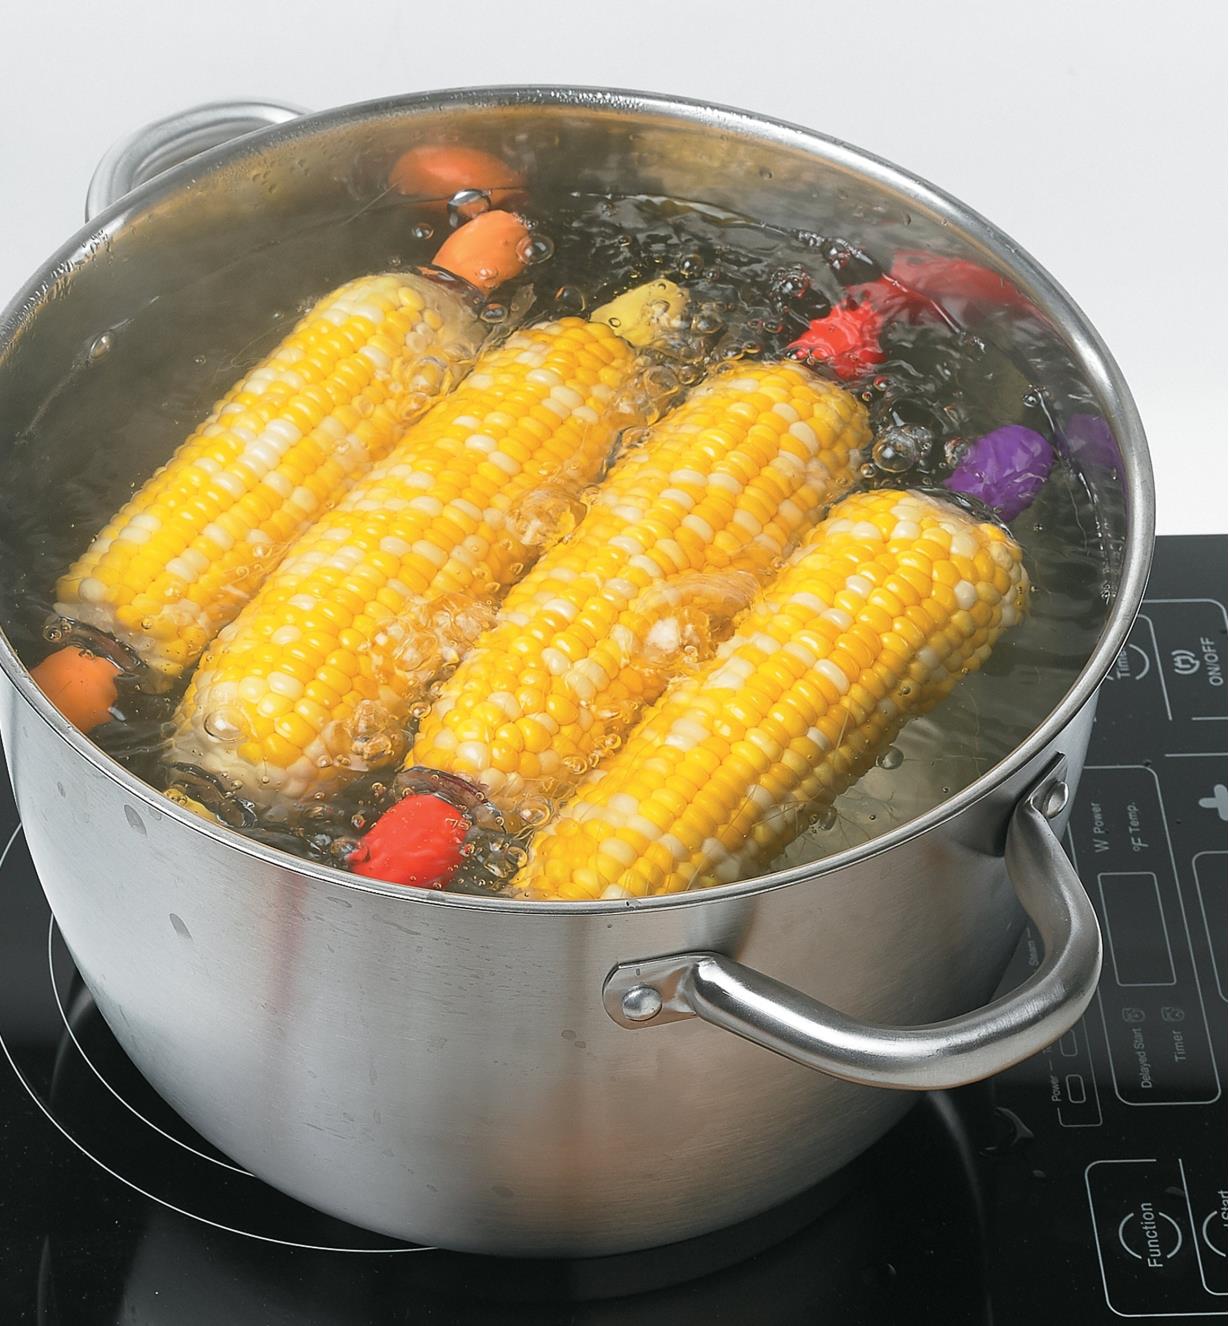 Four cobs of corn with corn holders in a pot of boiling water